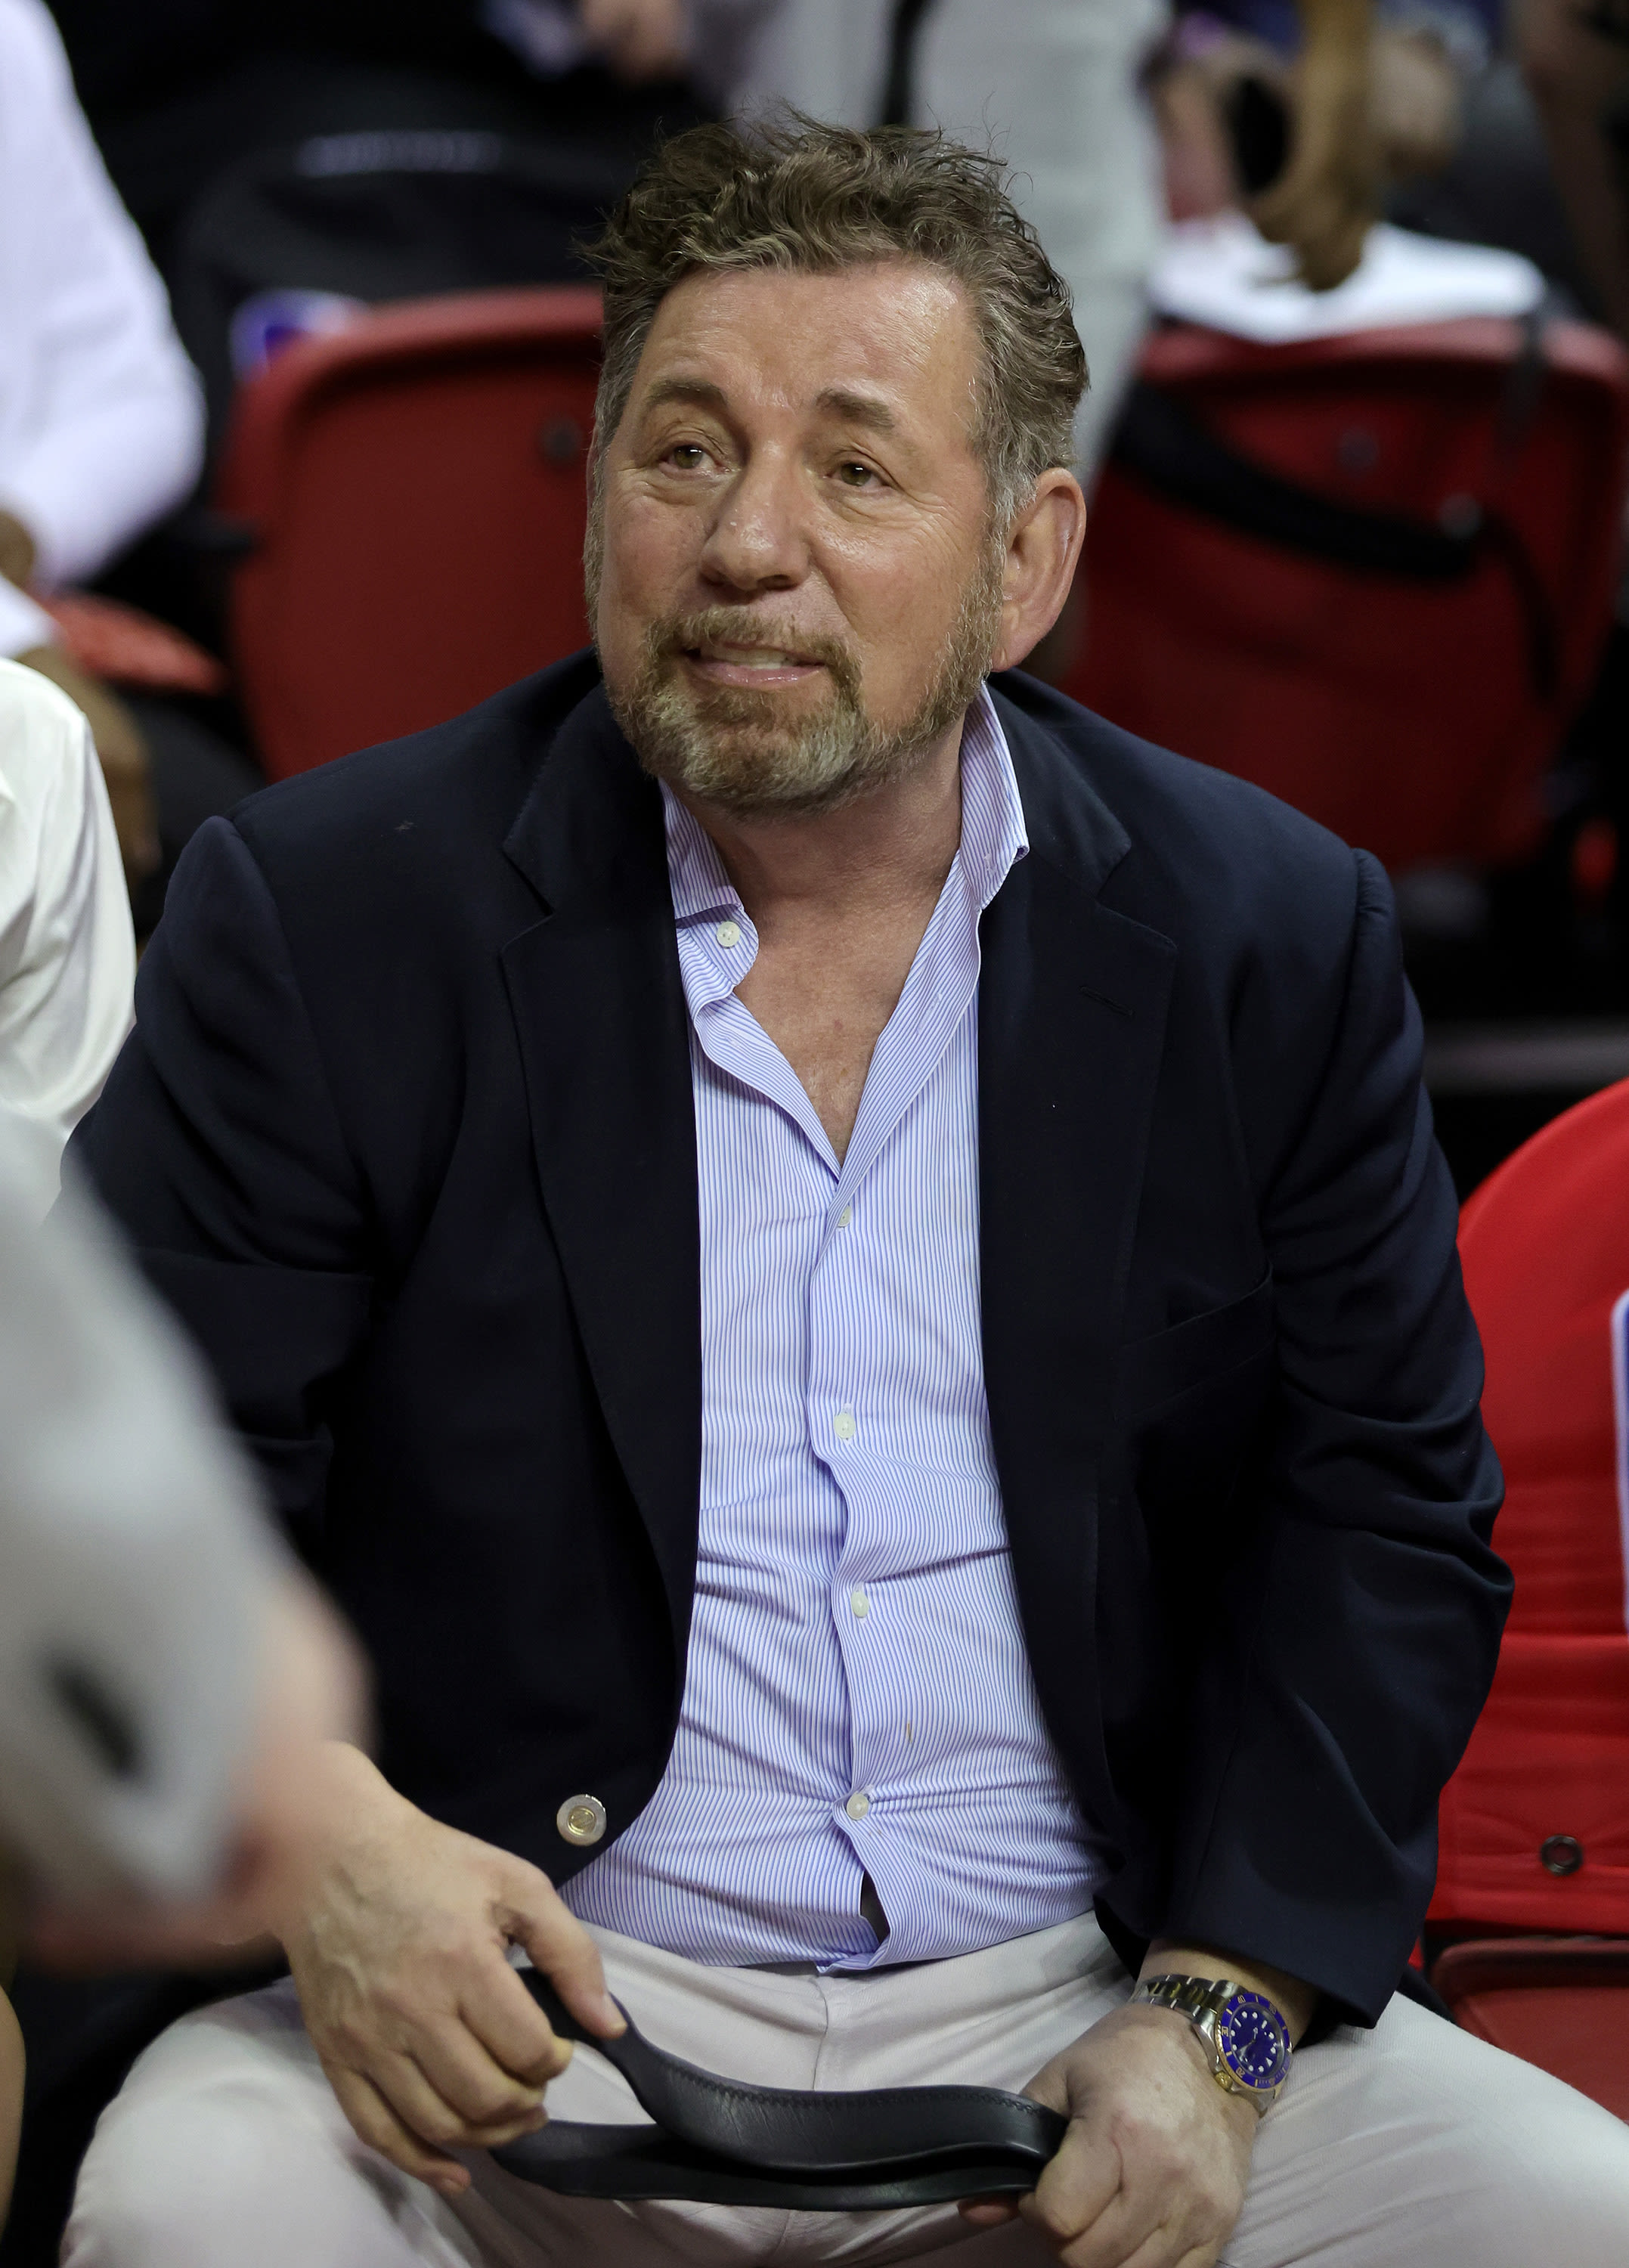 NBA sends financial breakdown to Board of Governors after scathing James Dolan letter: source